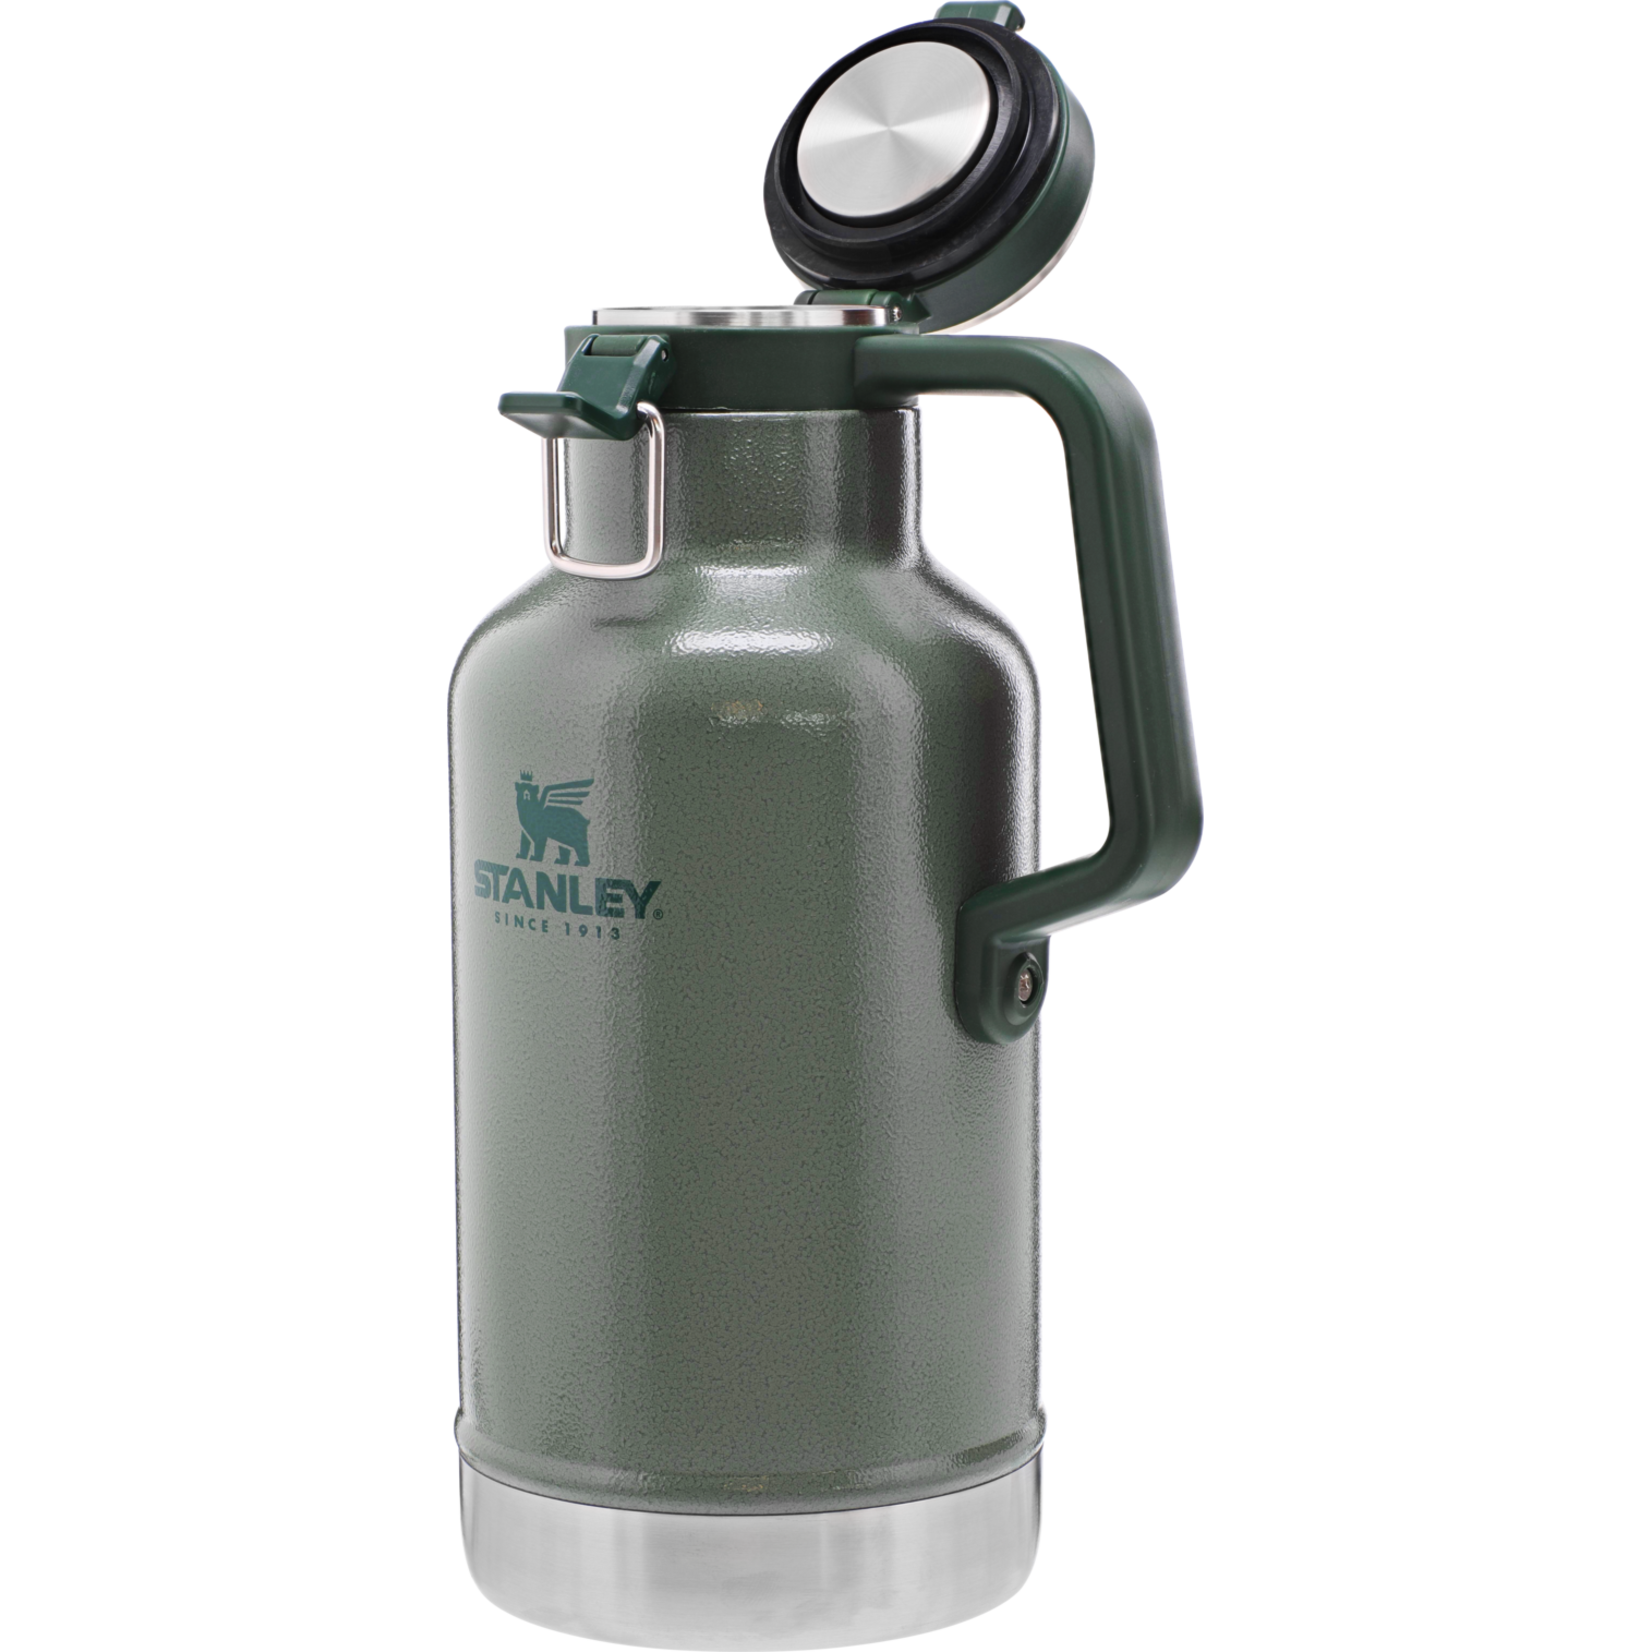 Stanley Built for Life since 1913 metal green thermos 1.1qt with handle NO  CUP